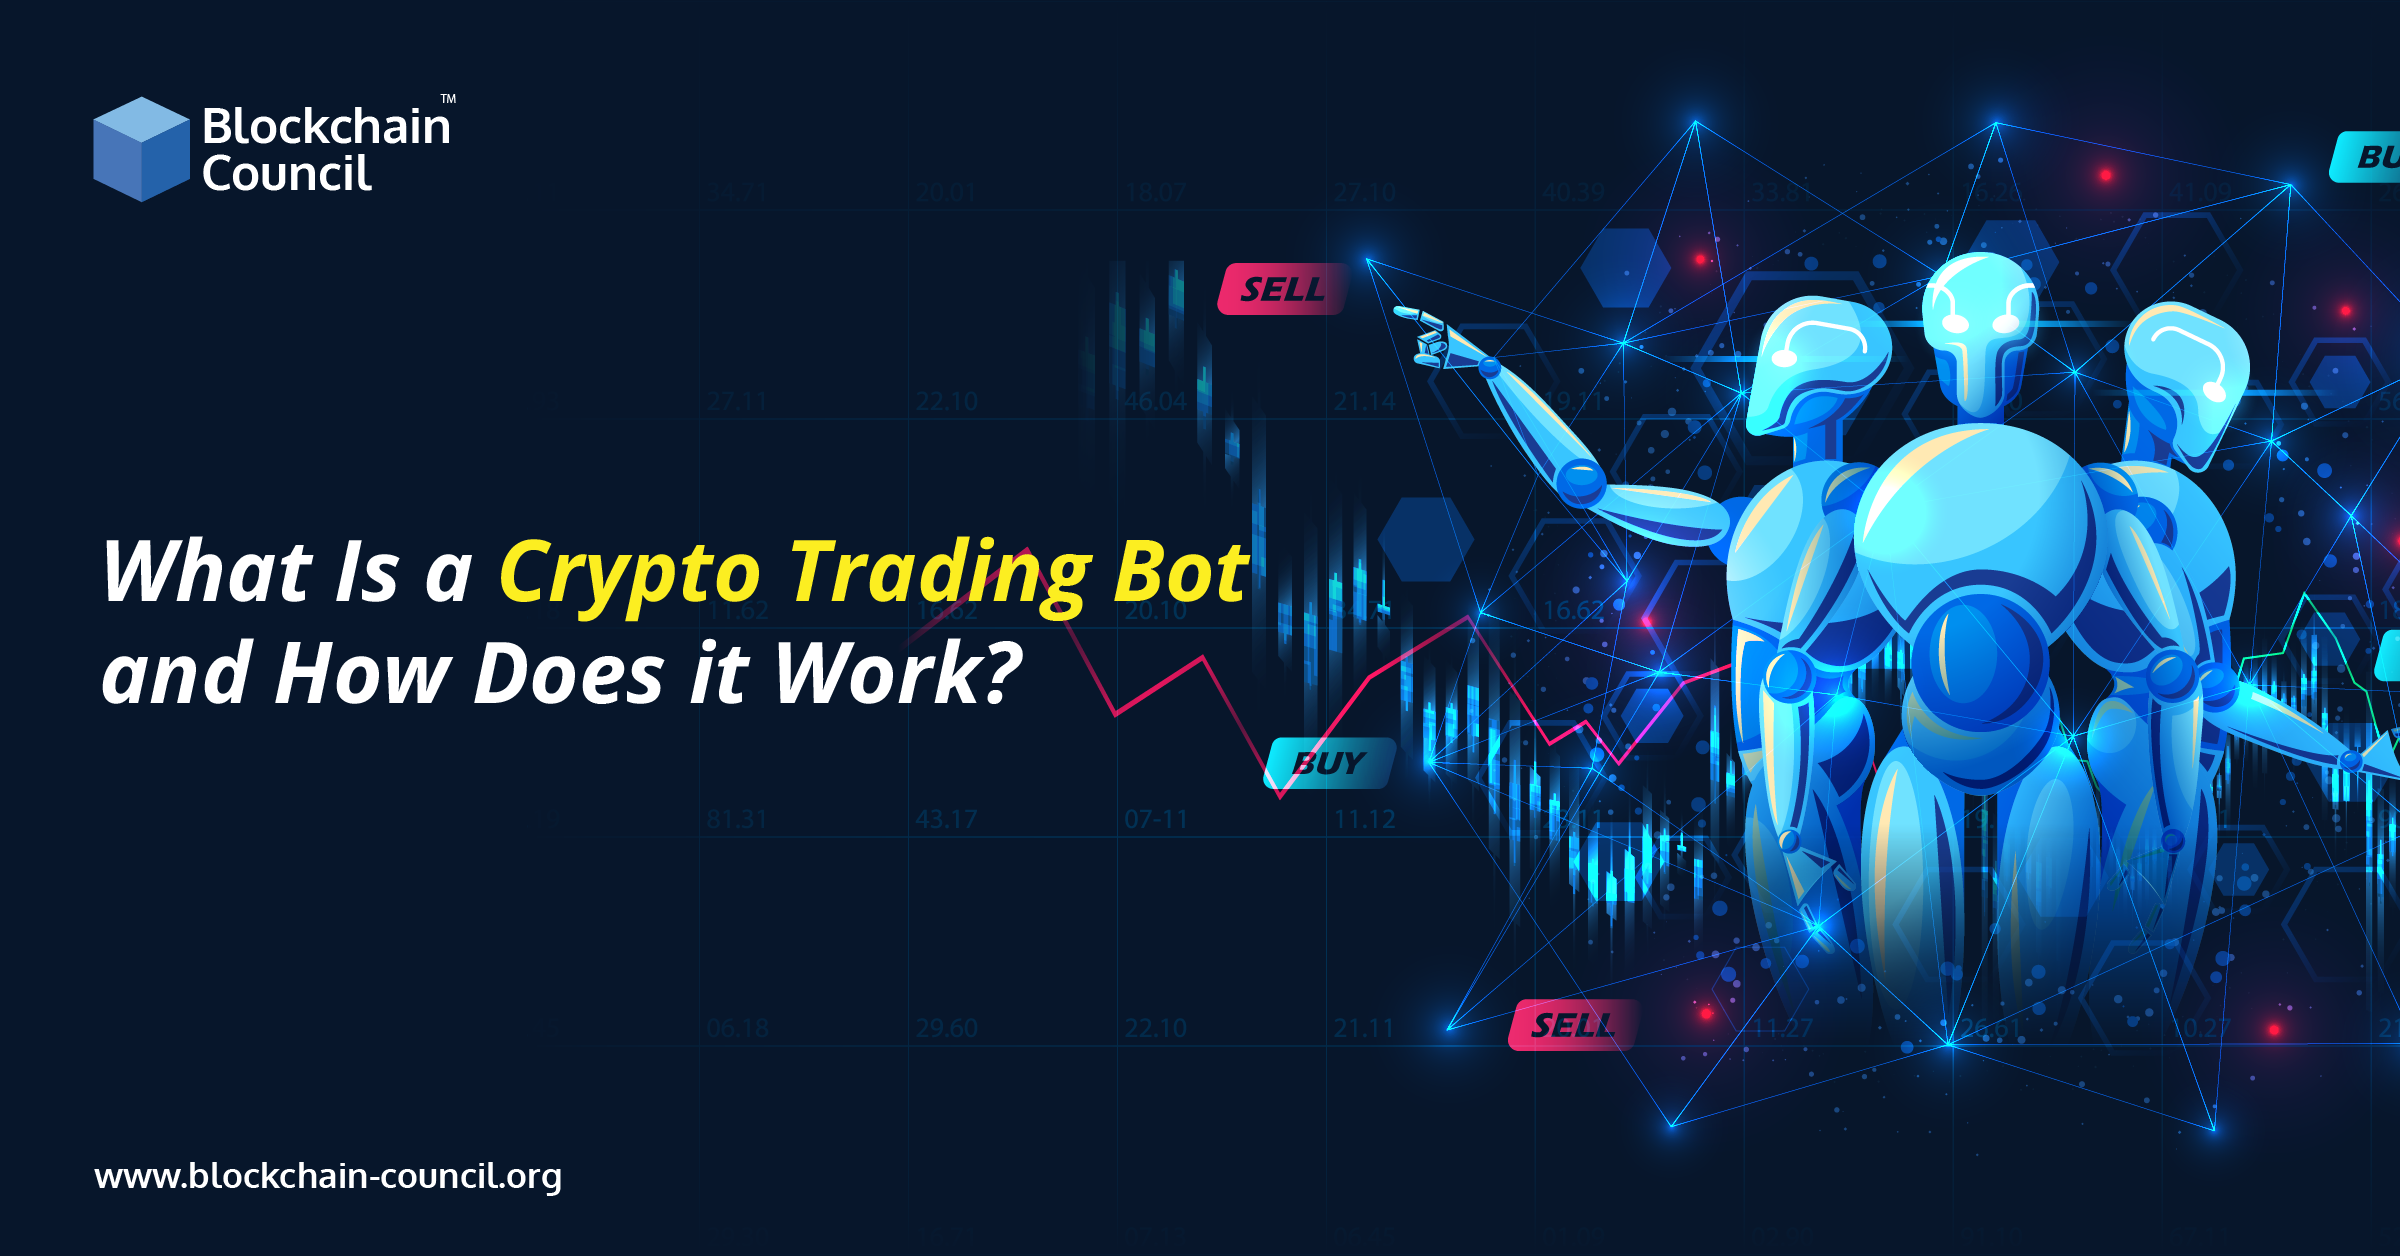 What Is a Crypto Trading Bot and How Does it Work?